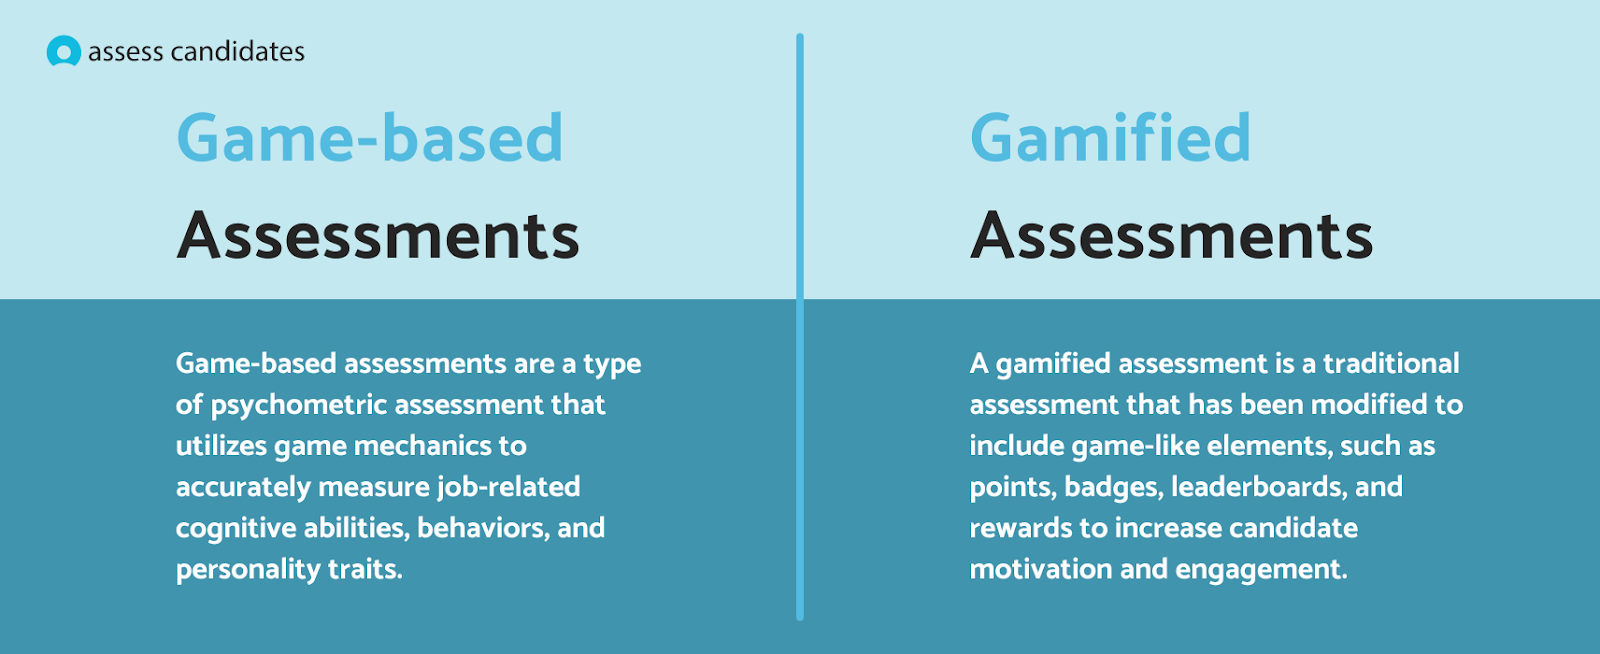 Game-based Assessments and Gamified Assessments for Hiring